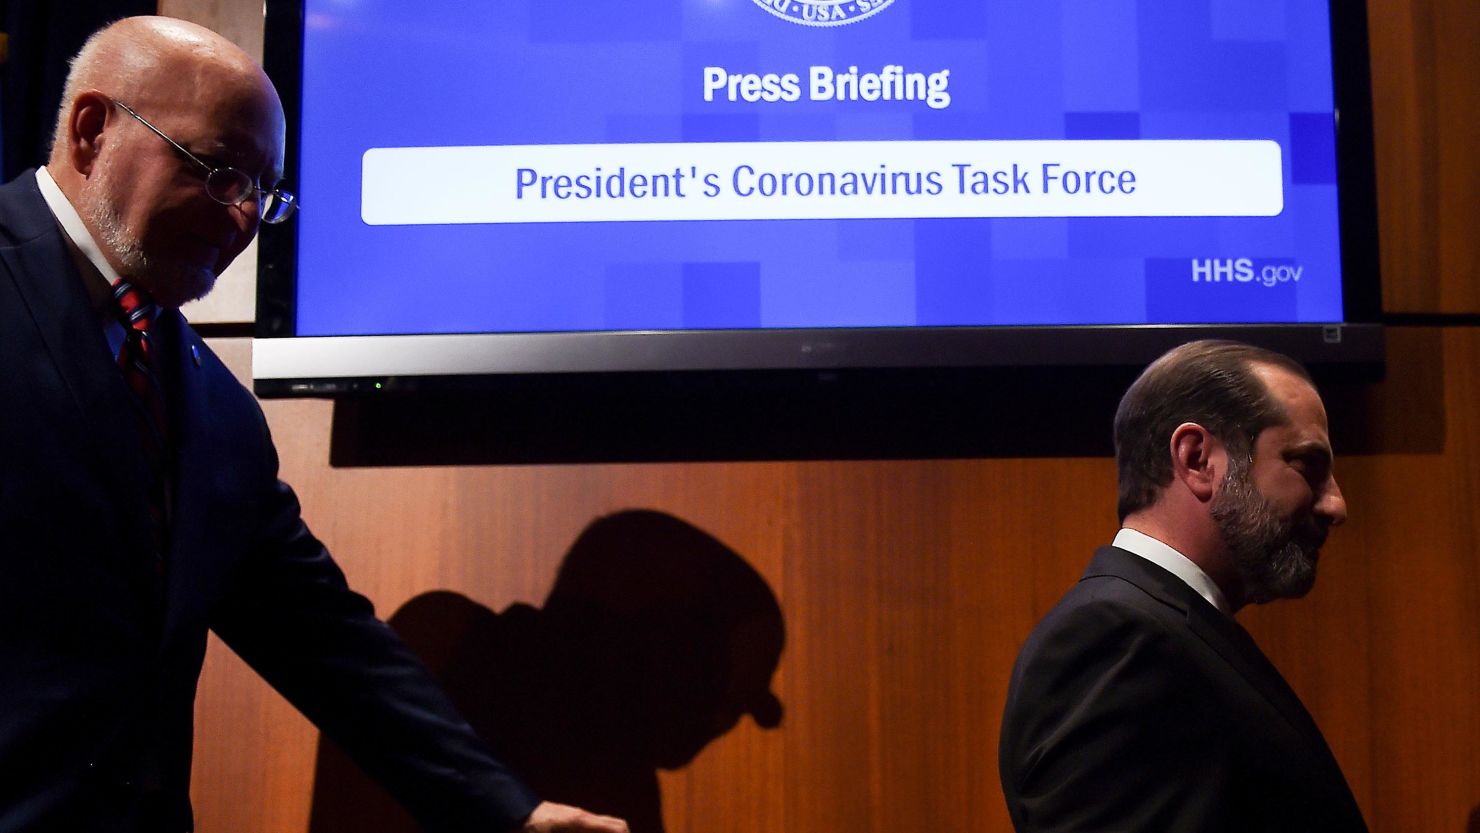 Health and Human Services Secretary Alex Azar (L) and Centers for Disease Control and Prevention (CDC) Director Robert Redfield leave after a press conference on the coordinated public health response to the 2019 coronavirus (2019-nCoV) on February 7, 2020 in Washington, DC.